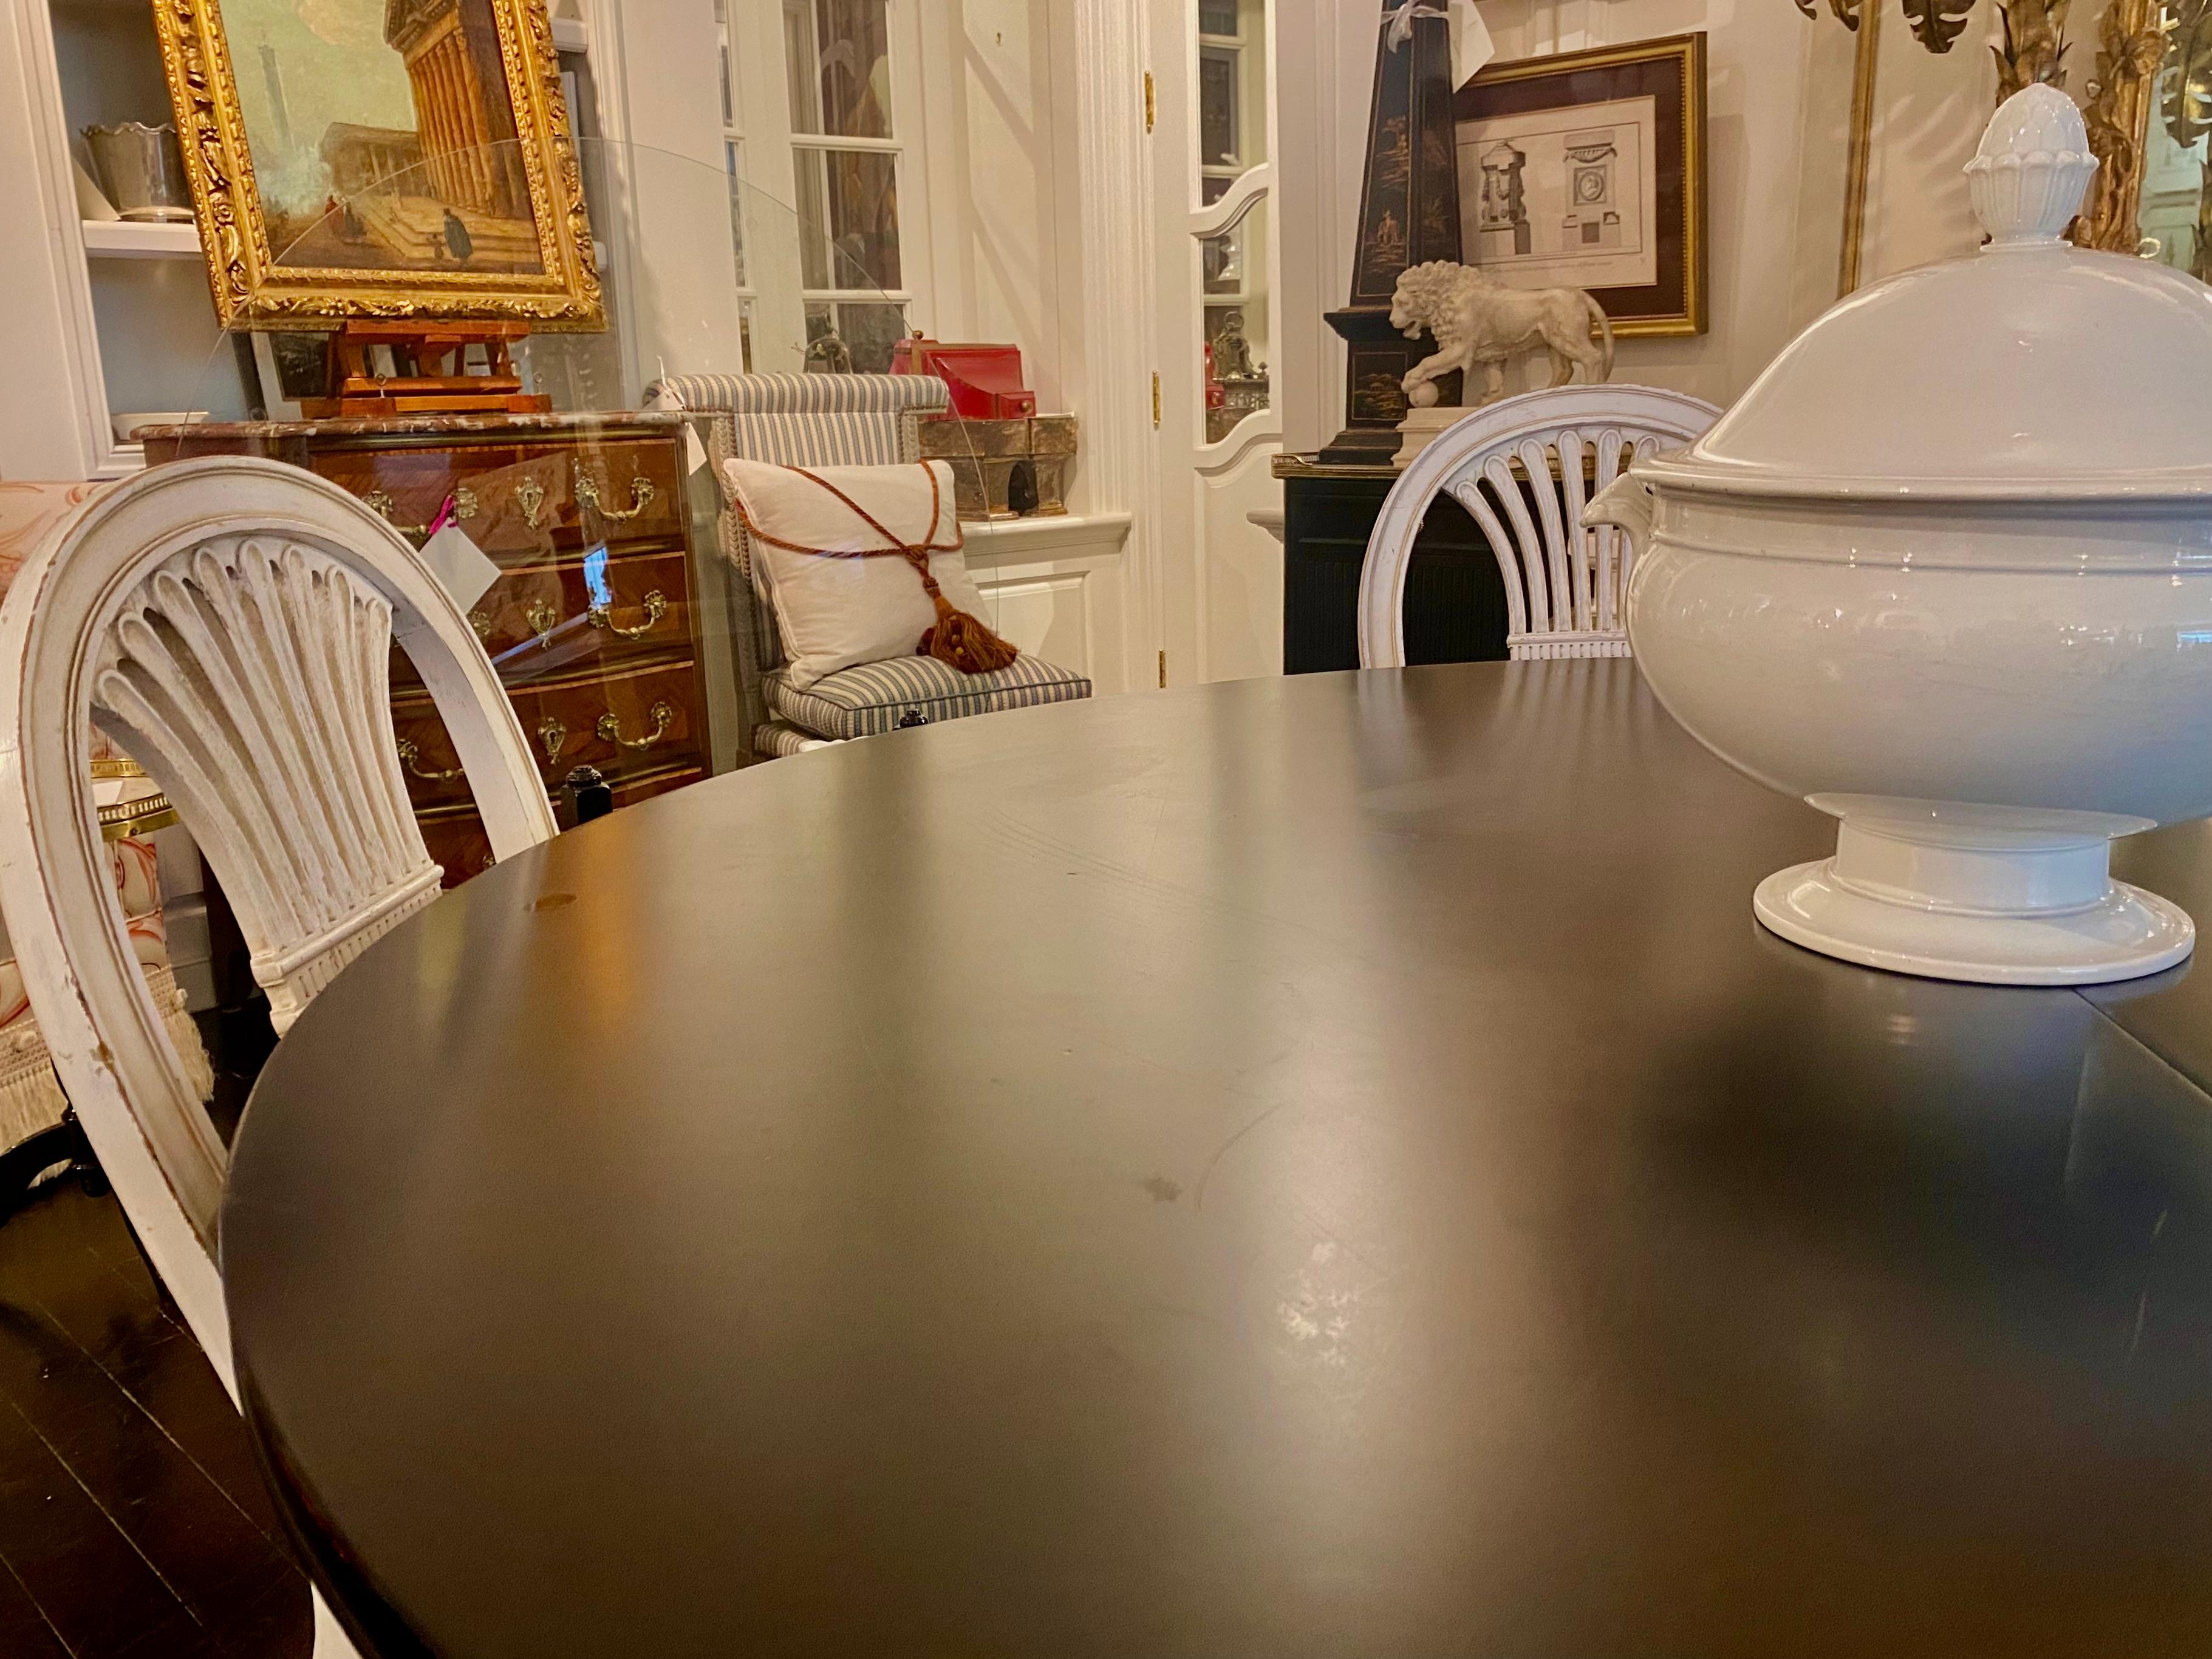 Maison Jansen Stamped Black Table, French, Louis XVI Style, Mid-Century Modern

Versatile Dining Table, bearing the clear Maison Jansen marking, and all the hallmarks of a Maison Jansen piece - a chic, jewel-like, very decorative rendition of a